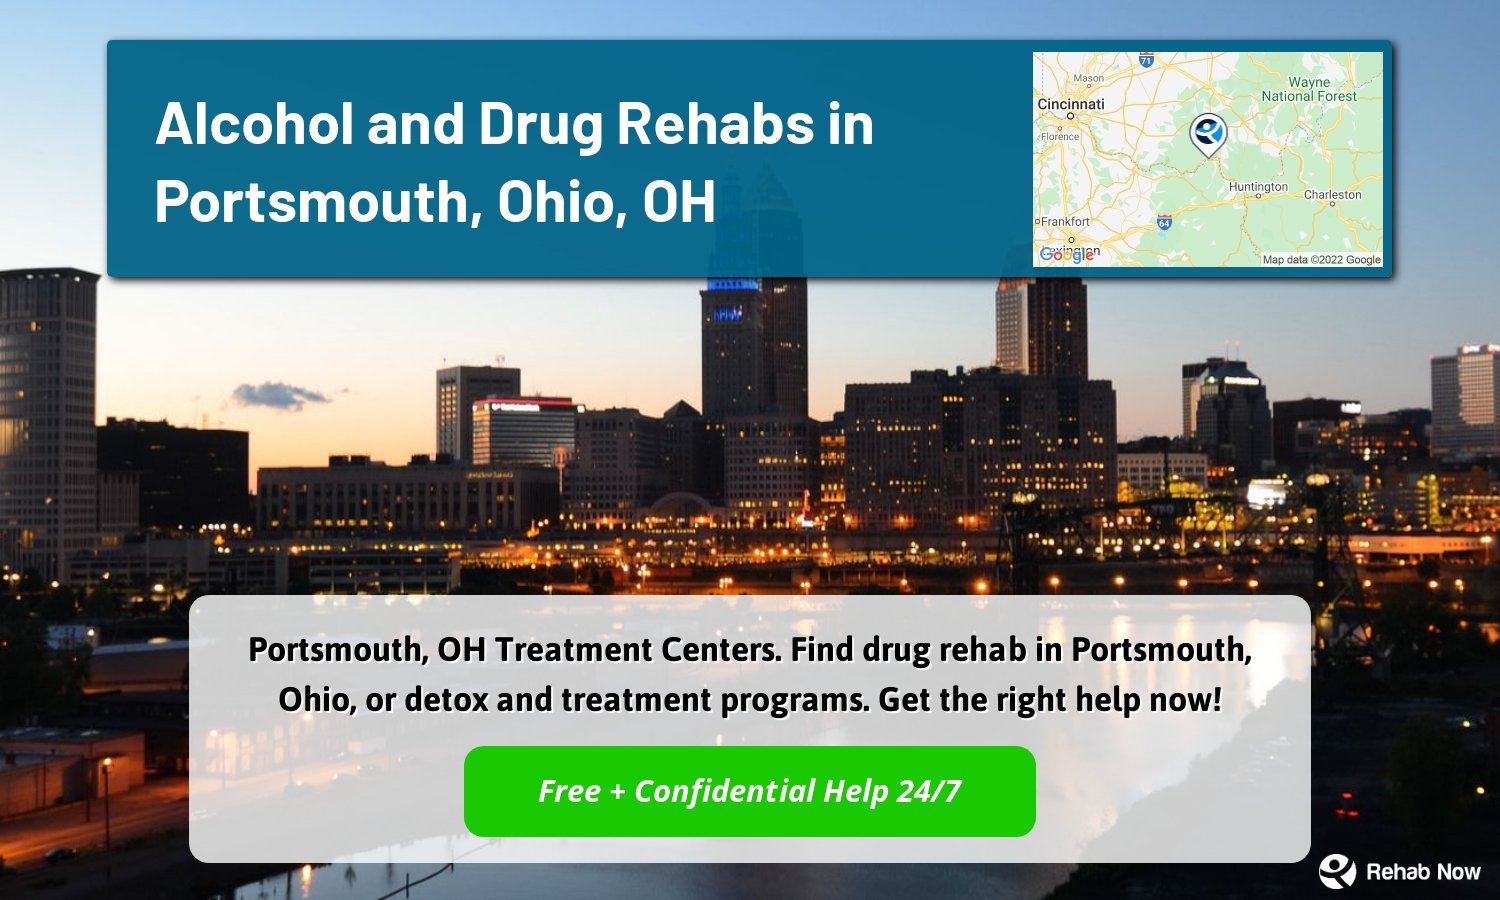 Portsmouth, OH Treatment Centers. Find drug rehab in Portsmouth, Ohio, or detox and treatment programs. Get the right help now!